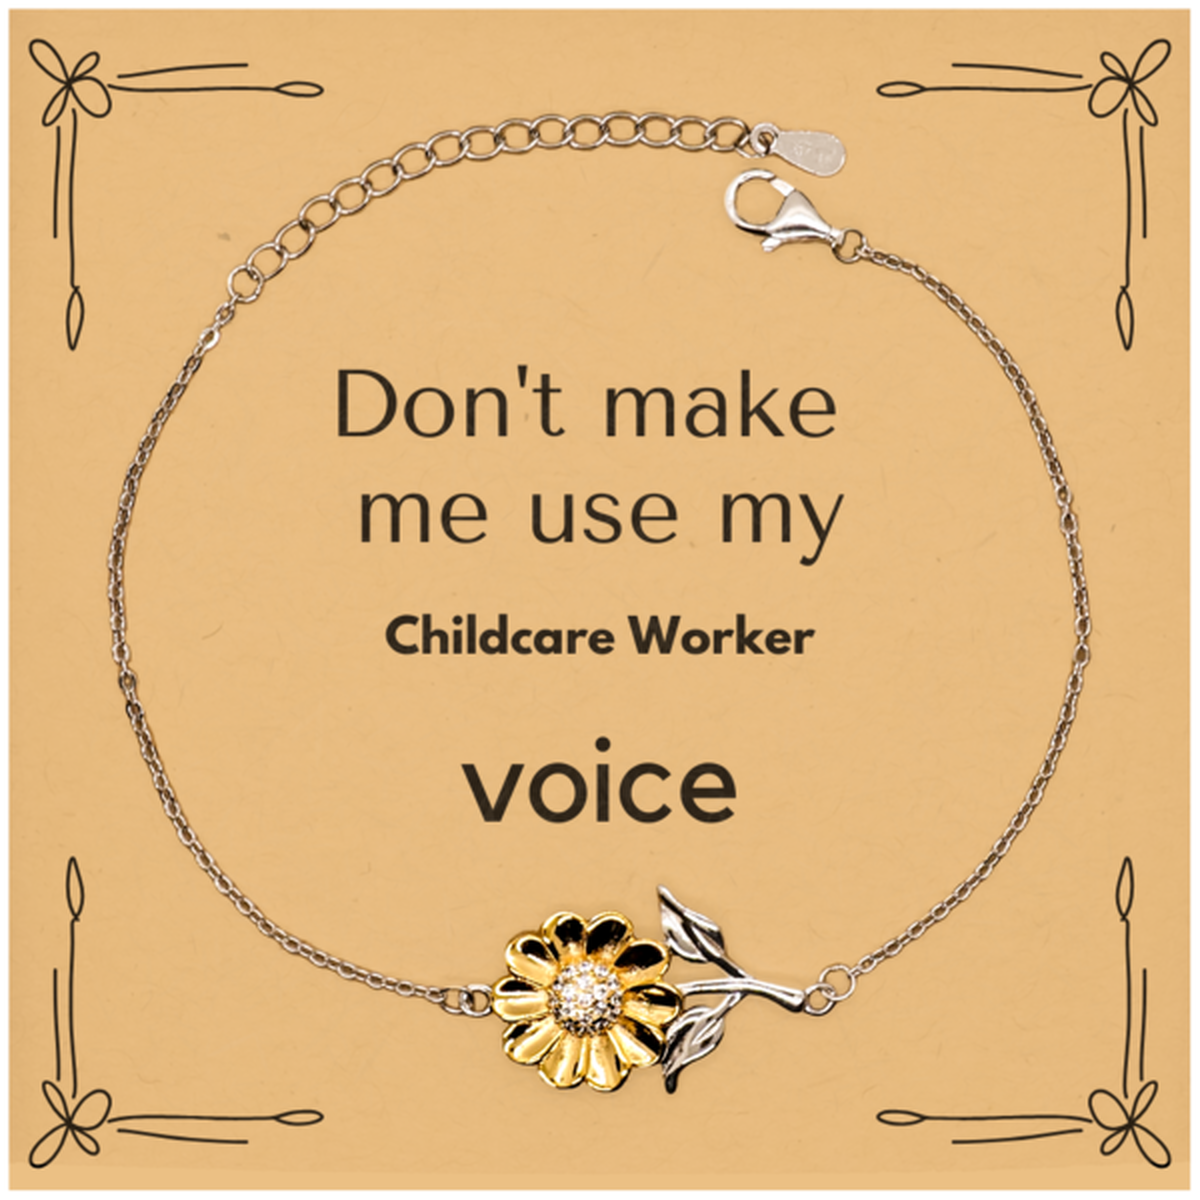 Don't make me use my Childcare Worker voice, Sarcasm Childcare Worker Card Gifts, Christmas Childcare Worker Sunflower Bracelet Birthday Unique Gifts For Childcare Worker Coworkers, Men, Women, Colleague, Friends